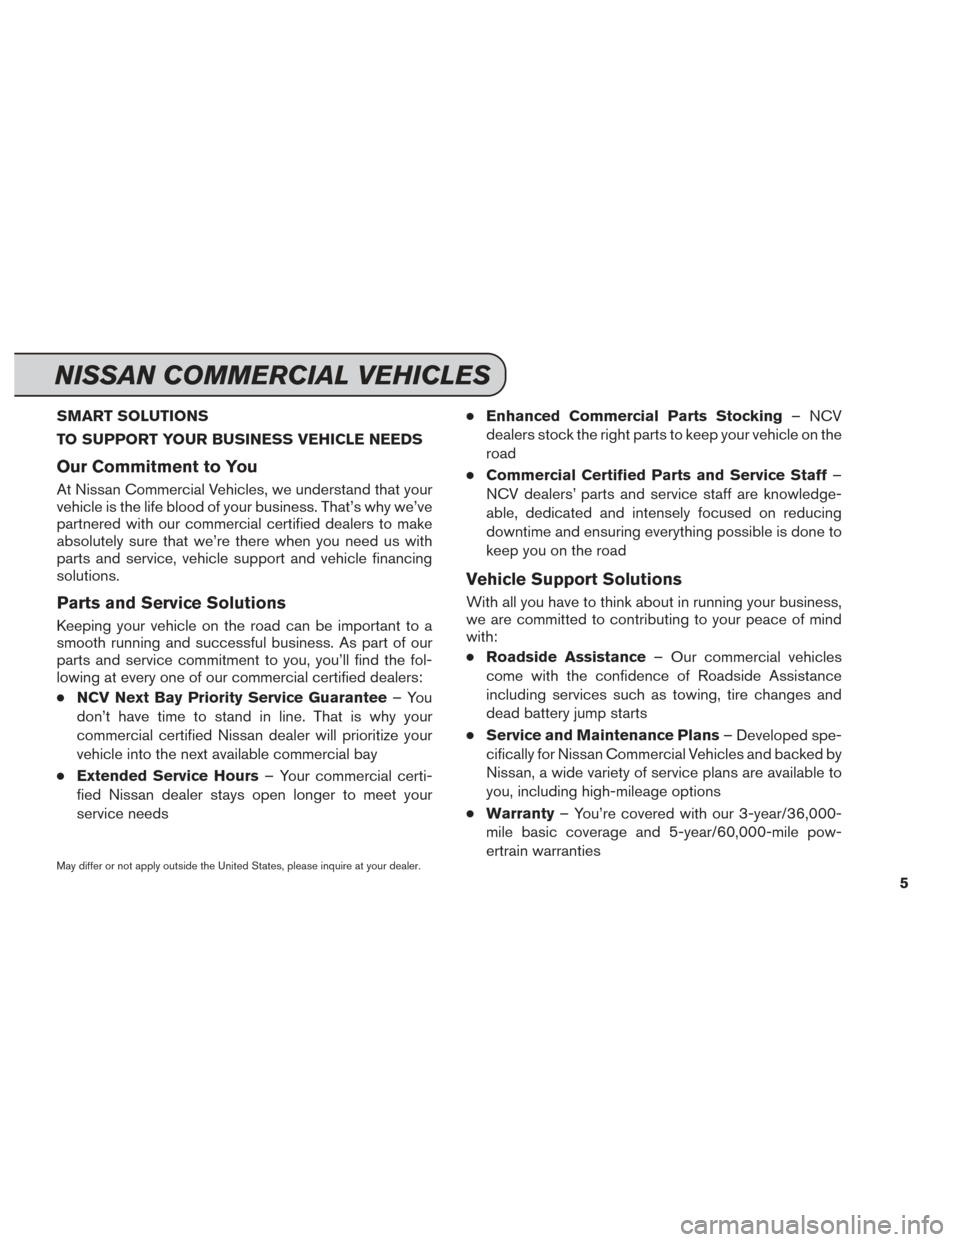 NISSAN FRONTIER 2014 D23 / 3.G Service And Maintenance Guide SMART SOLUTIONS
TO SUPPORT YOUR BUSINESS VEHICLE NEEDS
Our Commitment to You
At Nissan Commercial Vehicles, we understand that your
vehicle is the life blood of your business. That’s why we’ve
par